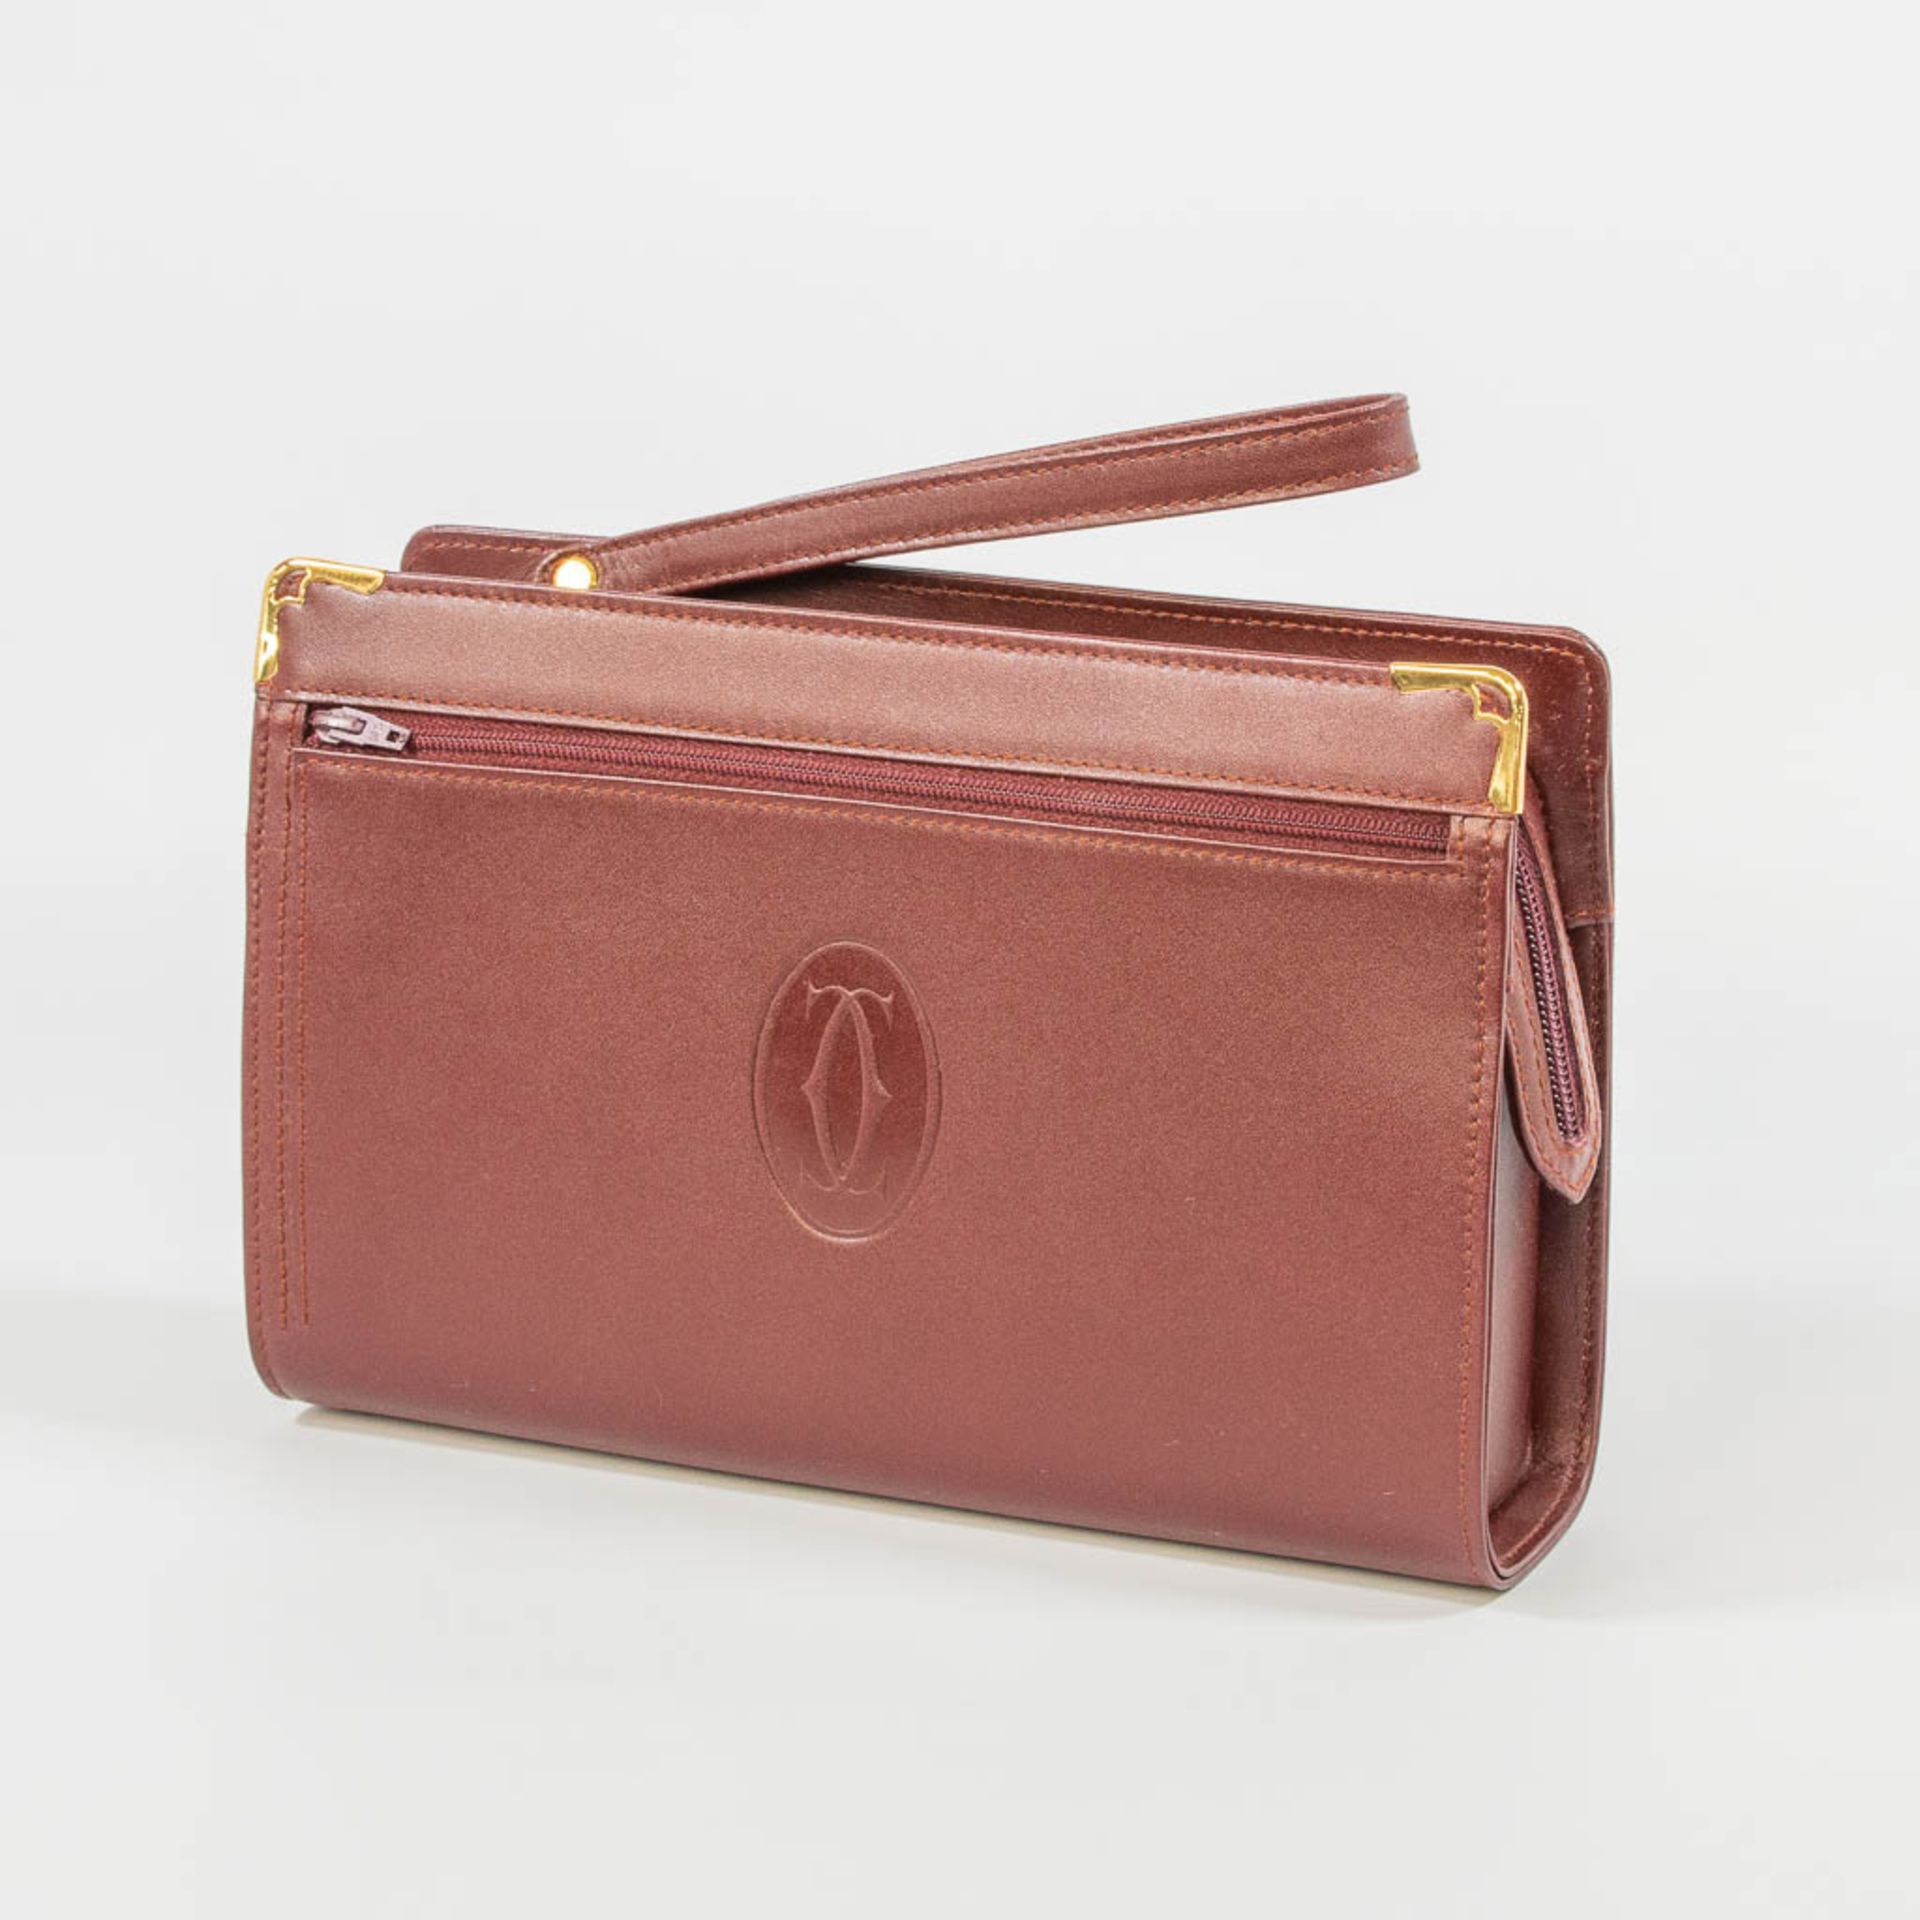 A Must De Cartier brown leather purse or handbag, New condition and in the original box. - Image 10 of 20